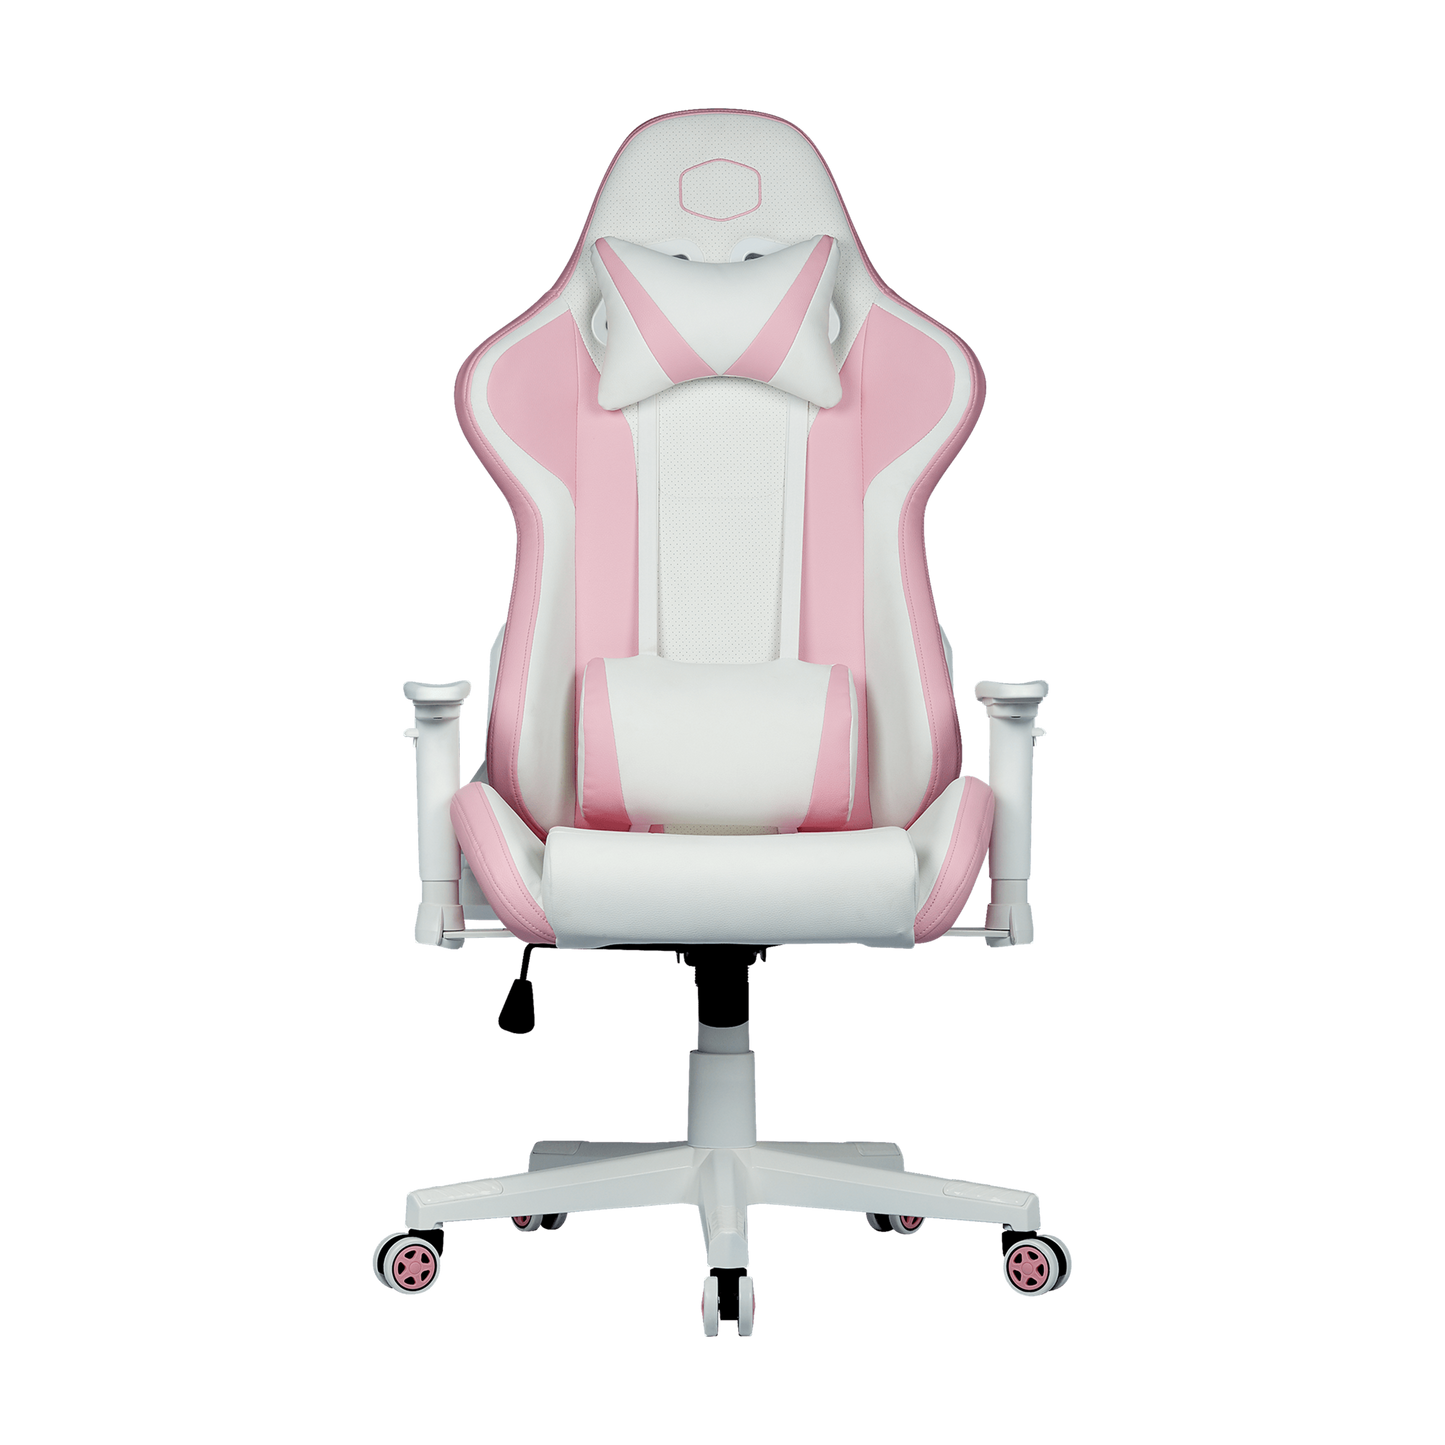 COOLER MASTER CALIBER R1S GAMING CHAIR PINK/WHITE